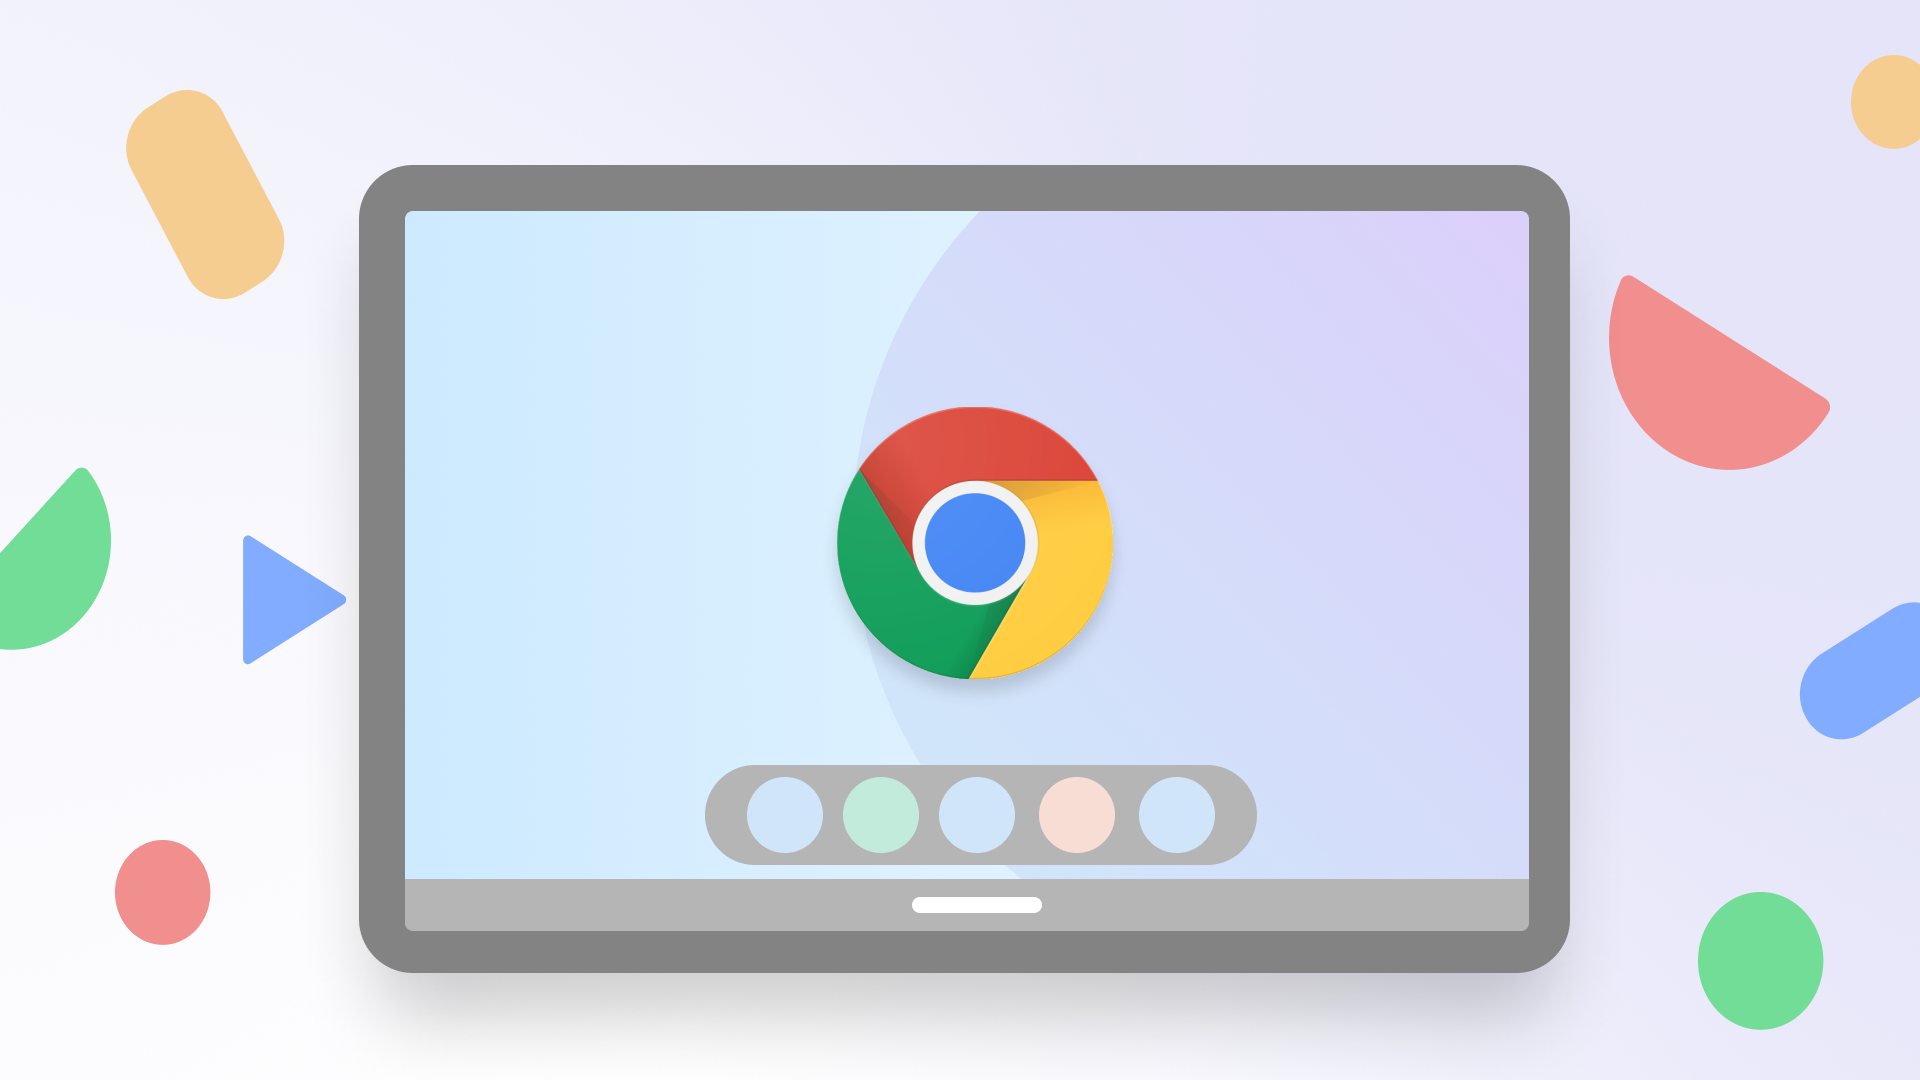 Chrome OS 101 is here with big changes to the launcher and the branding